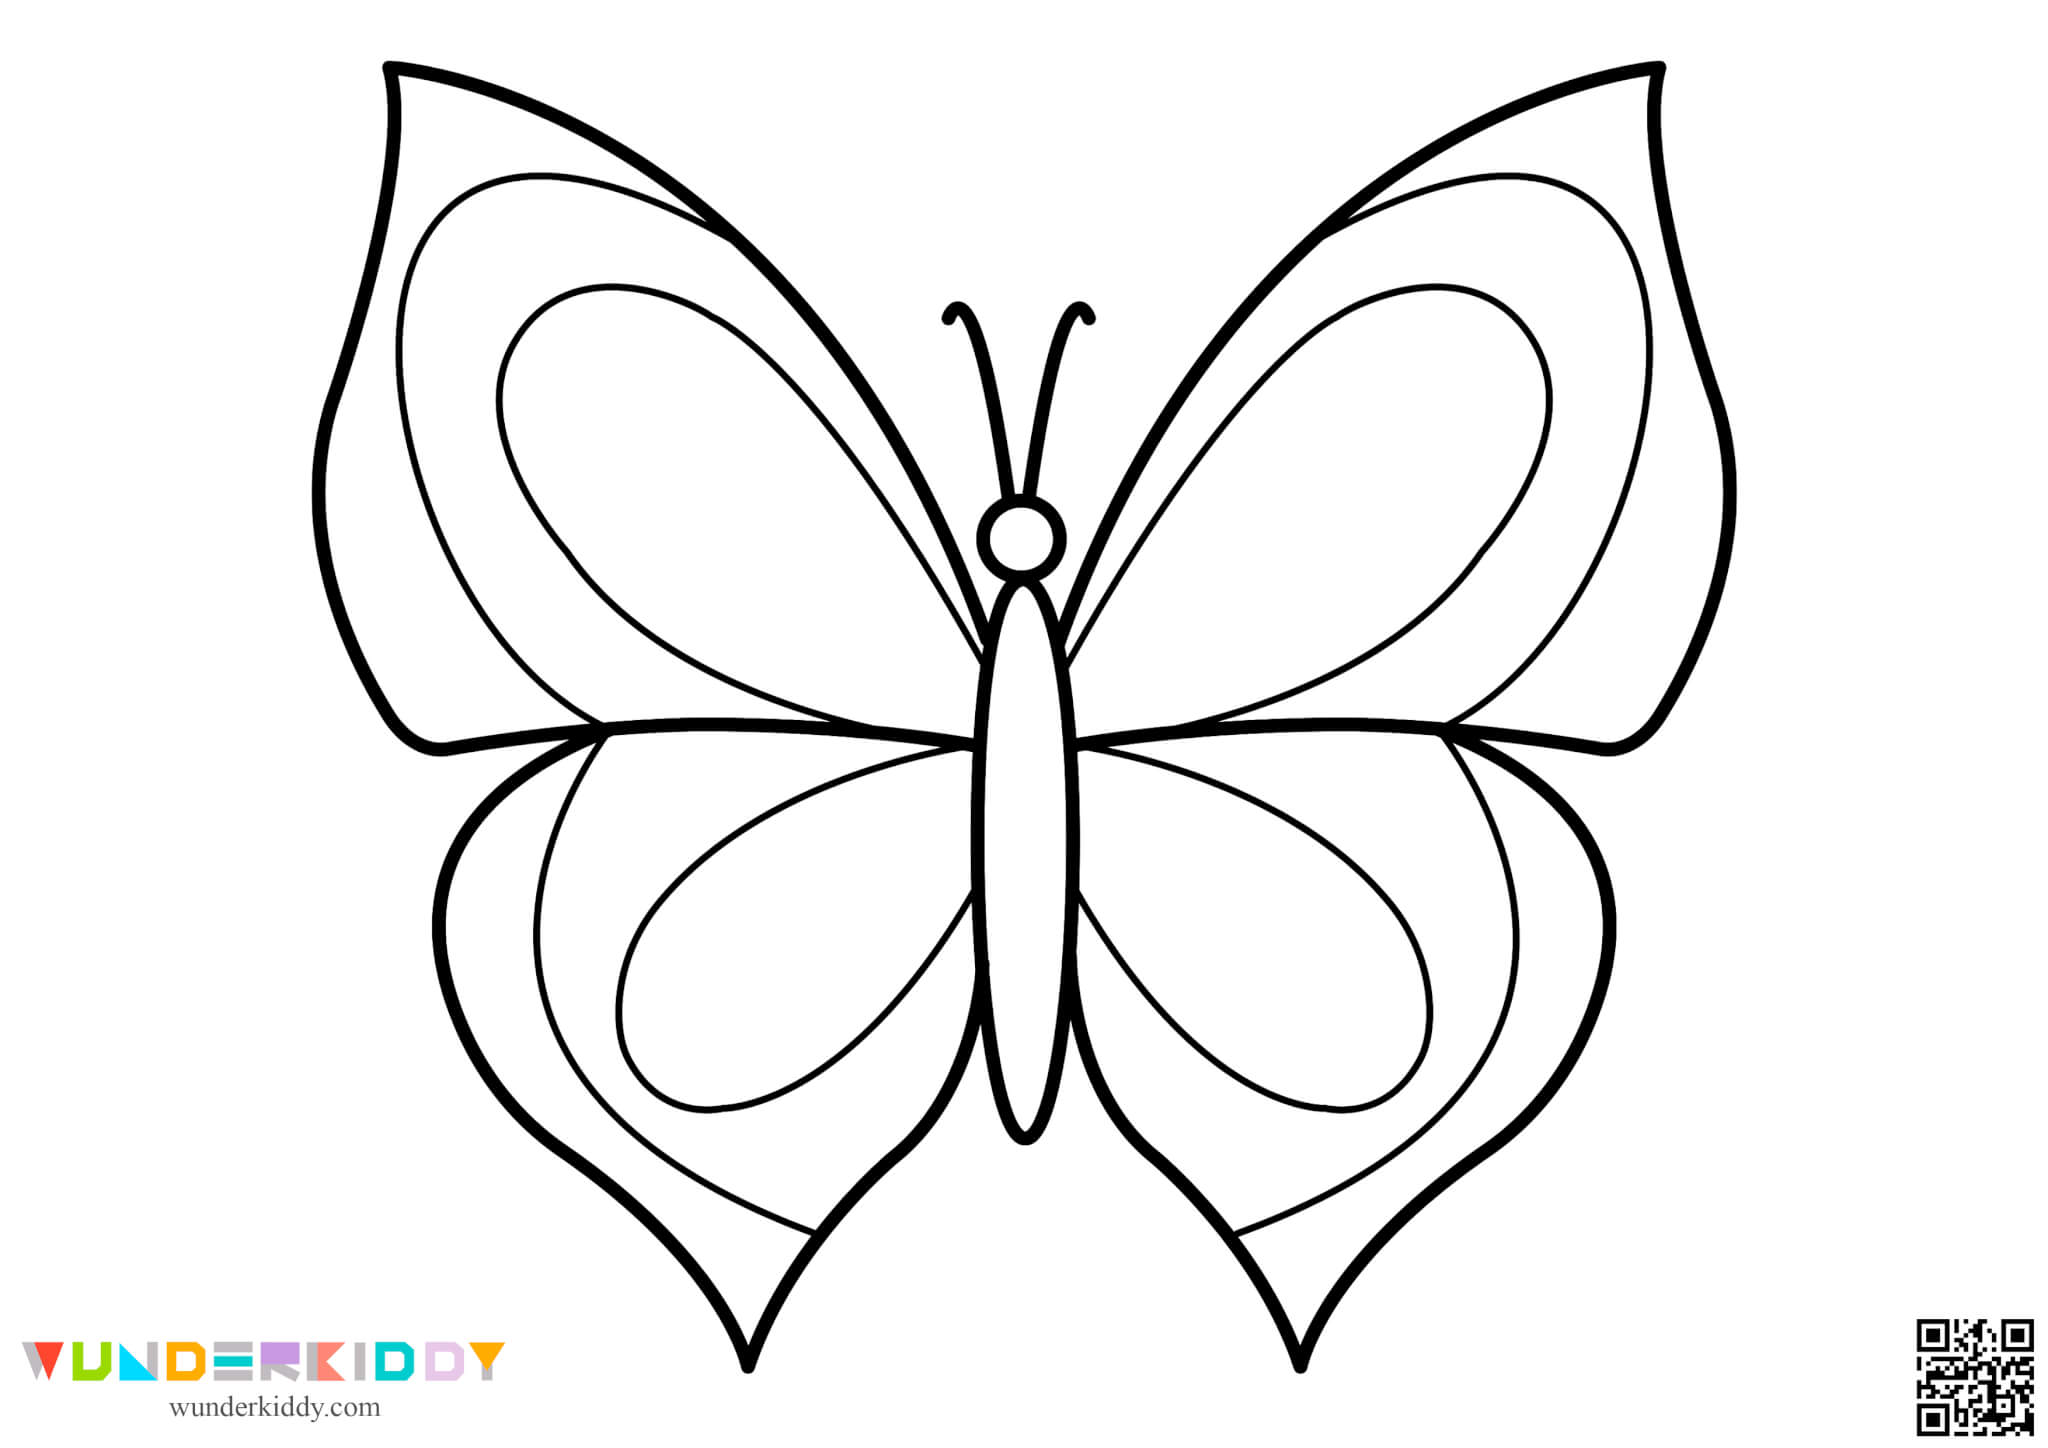 Butterfly Template Printable - Image 4